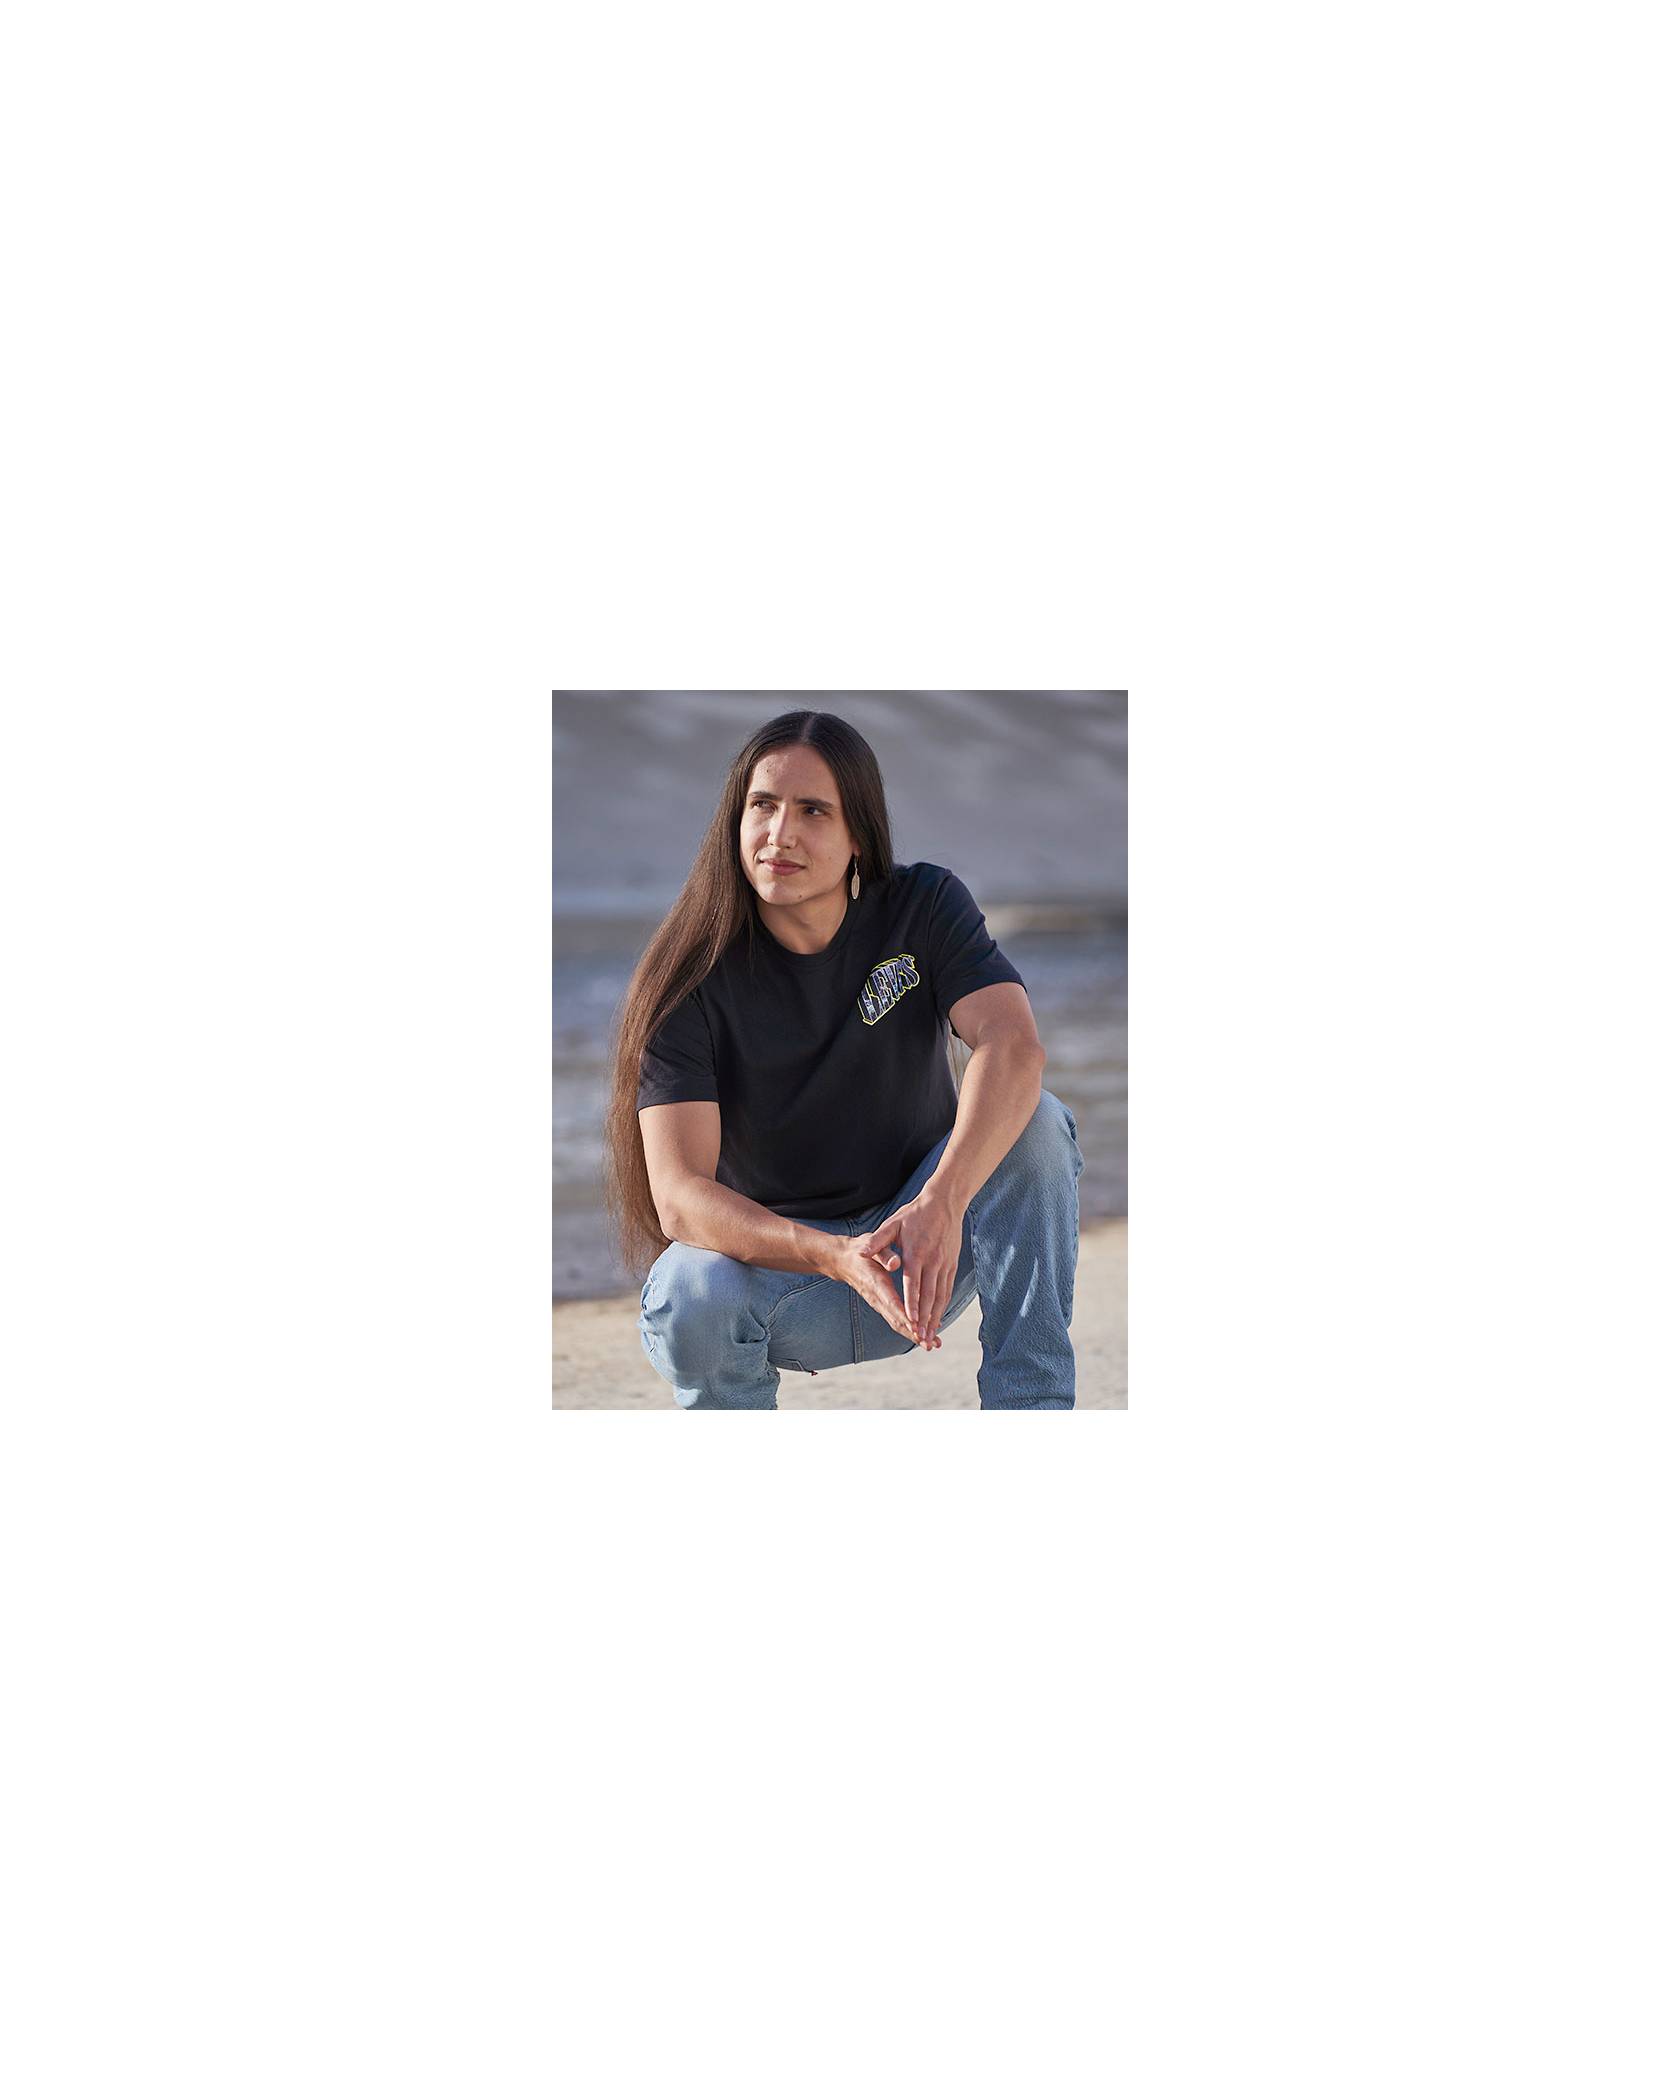 Three photos, one of a bridge, one of Xiuhtezcatl squatting on the ground and one of a close up shot of the breast pocket of a Levi's button up shirt.